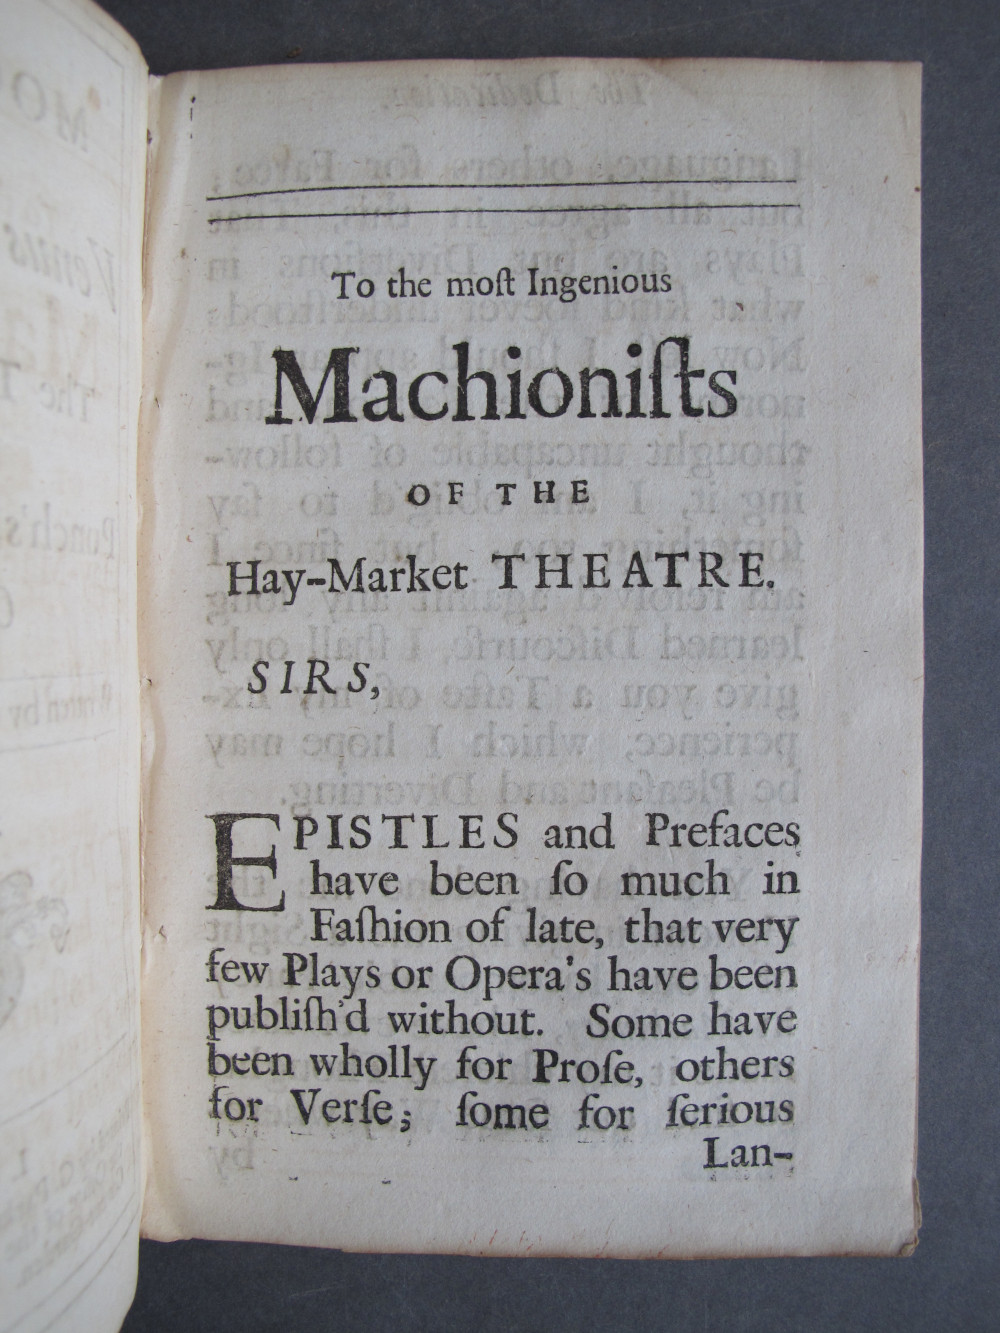 Folio A3 recto, text: 
To the most Ingenious
Machionists
OF THE
Hay-Market THEATRE.

SIRS,
EPISTLES and Prefaces
have been so much in
Fashion of late, that very
few Plays or Opera's have been
publish'd without. Some have
been wholly for Prose, others
for Verse; some for serious

Lan-

